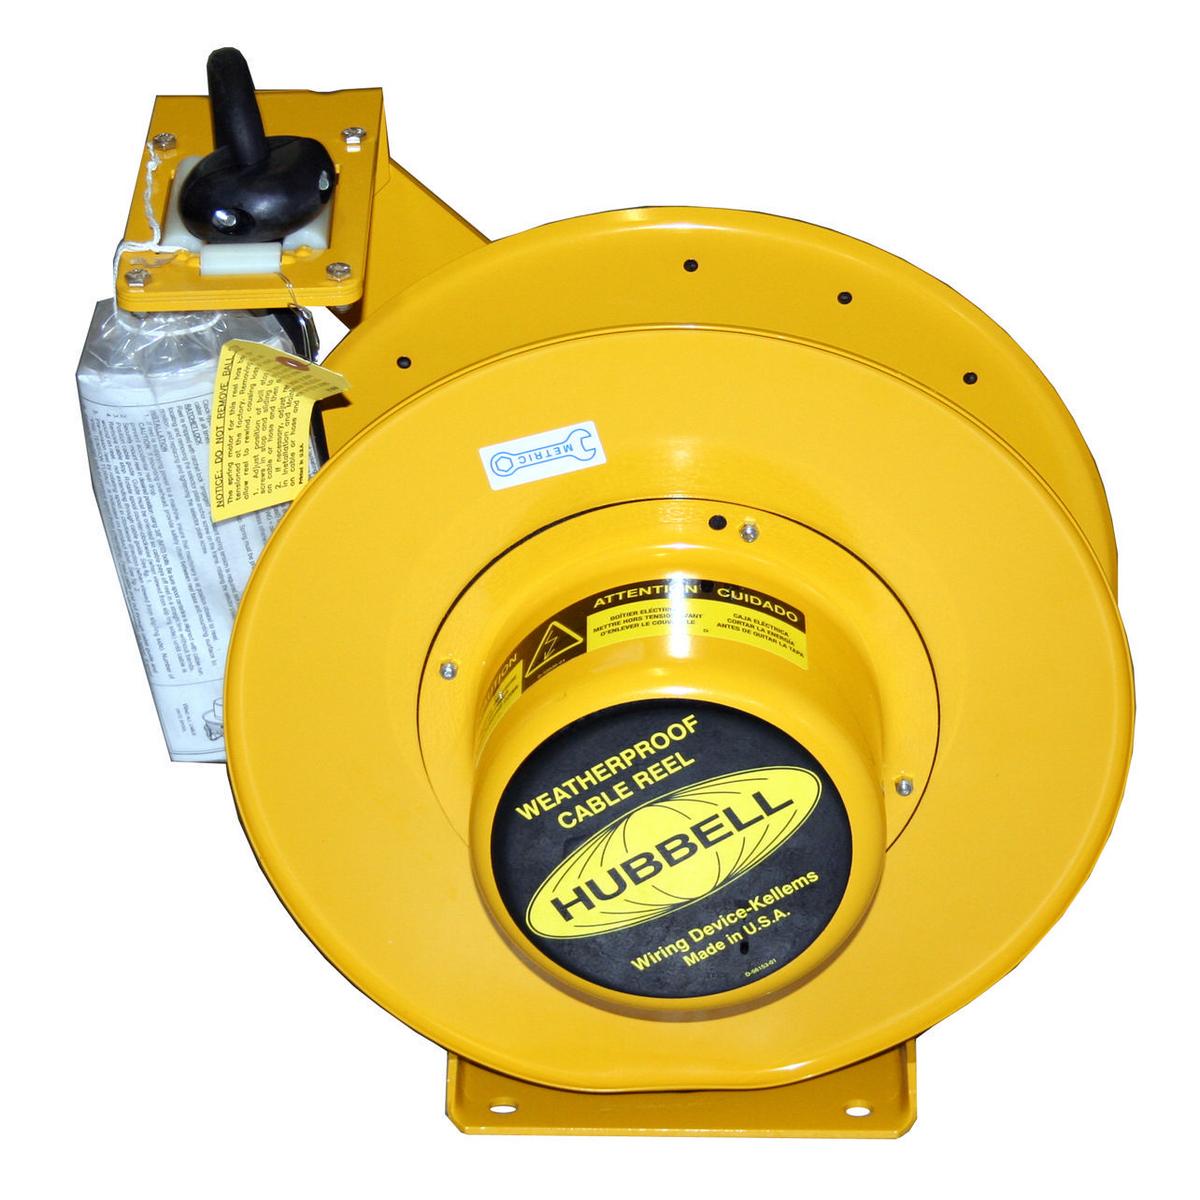 Hubbell HBL501032W Cord and Cable Reels, Weatherproof Cord Reel, 50', 10/3 SO Cord, Yellow  ; Ratchet lock can be disengaged in field ; Optional pivot base allows 340� rotation of reel ; Multi-position roller guide can be mounted in four different positions ; Ratchet Lock a